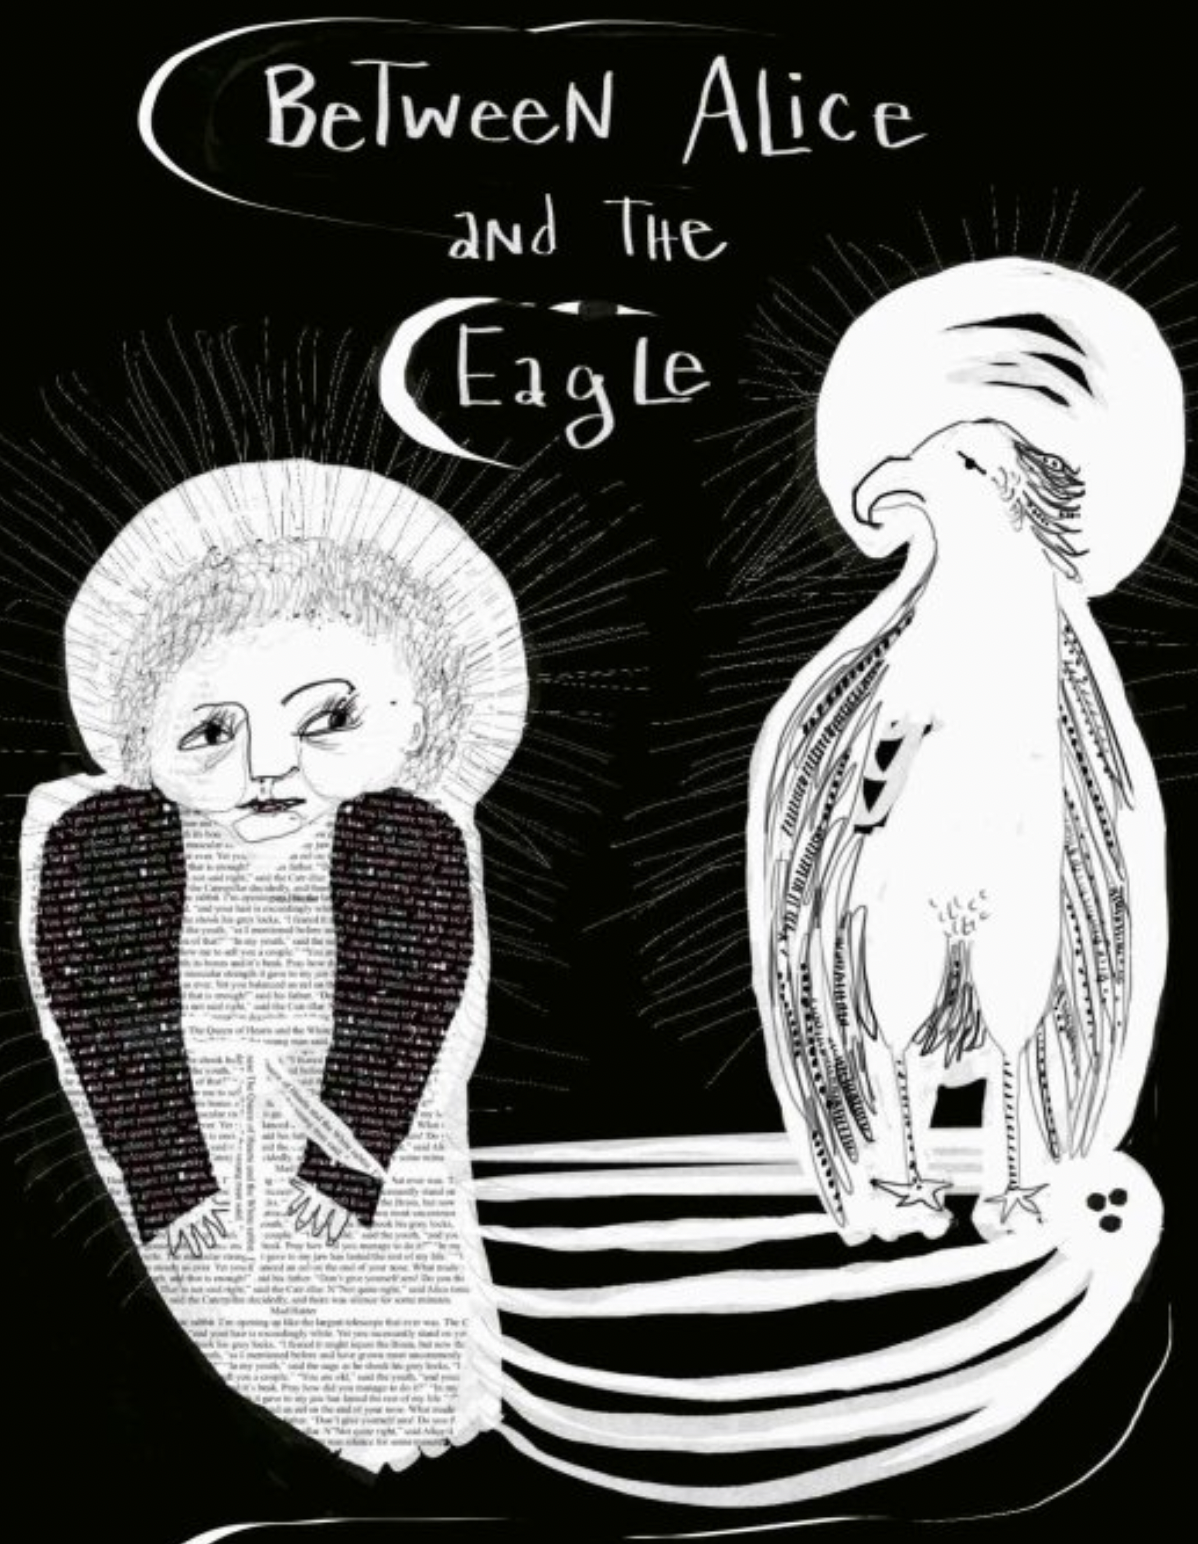 Between Alice and Eagle